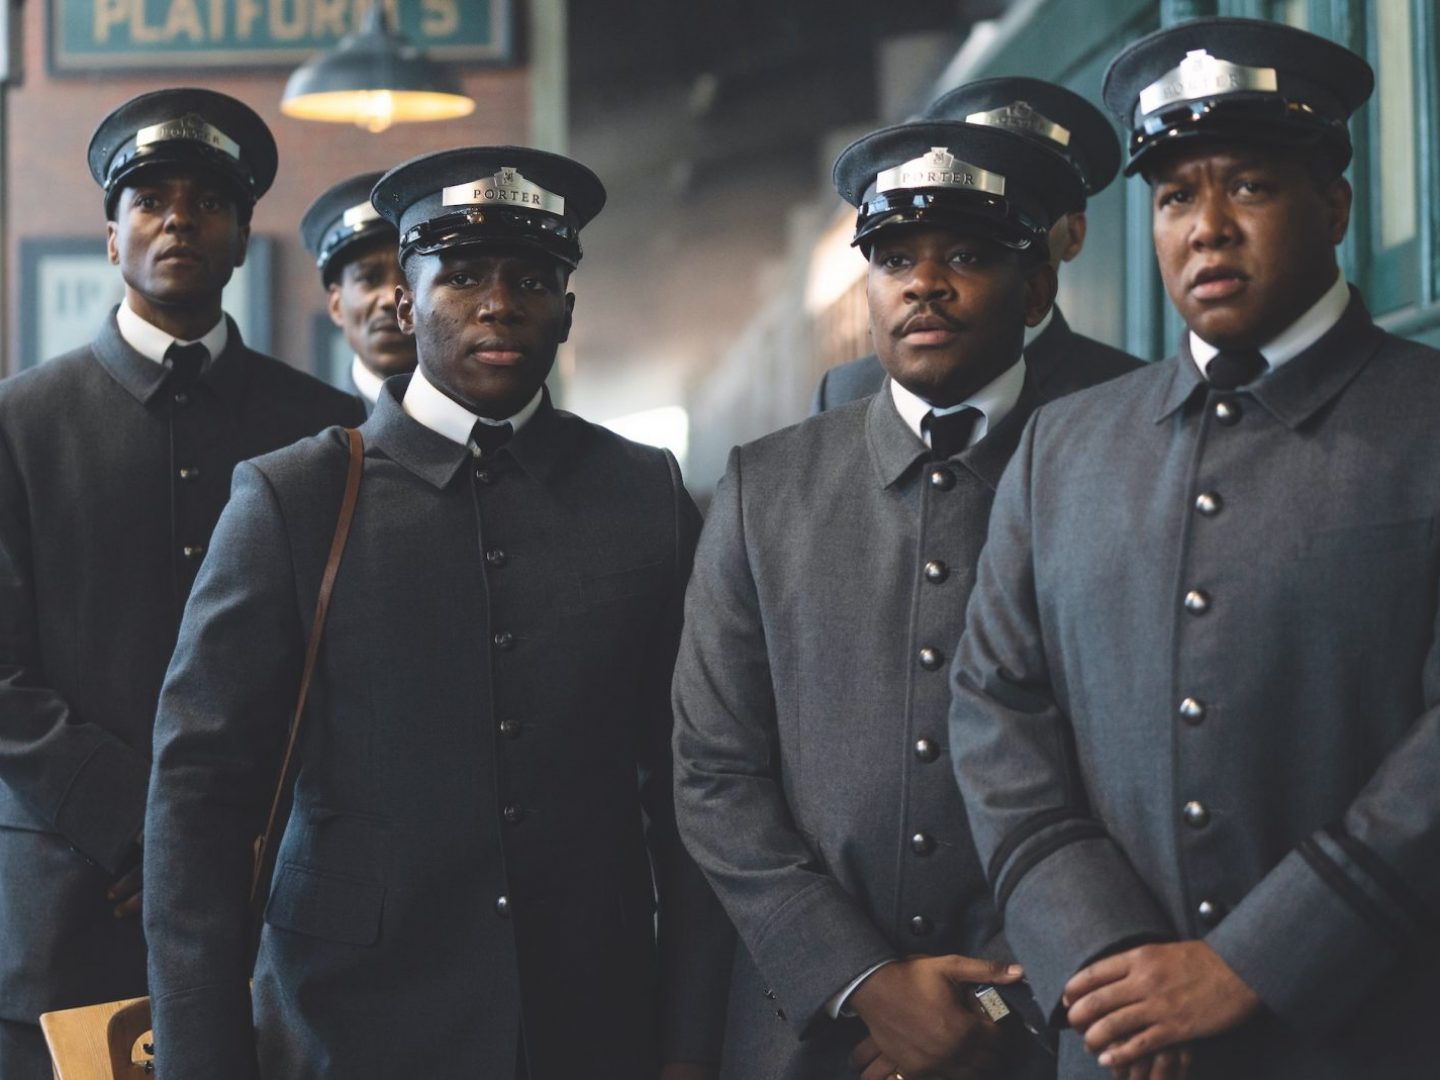 Four actors dressed up as railway porters are seen in a still from "The Porter."